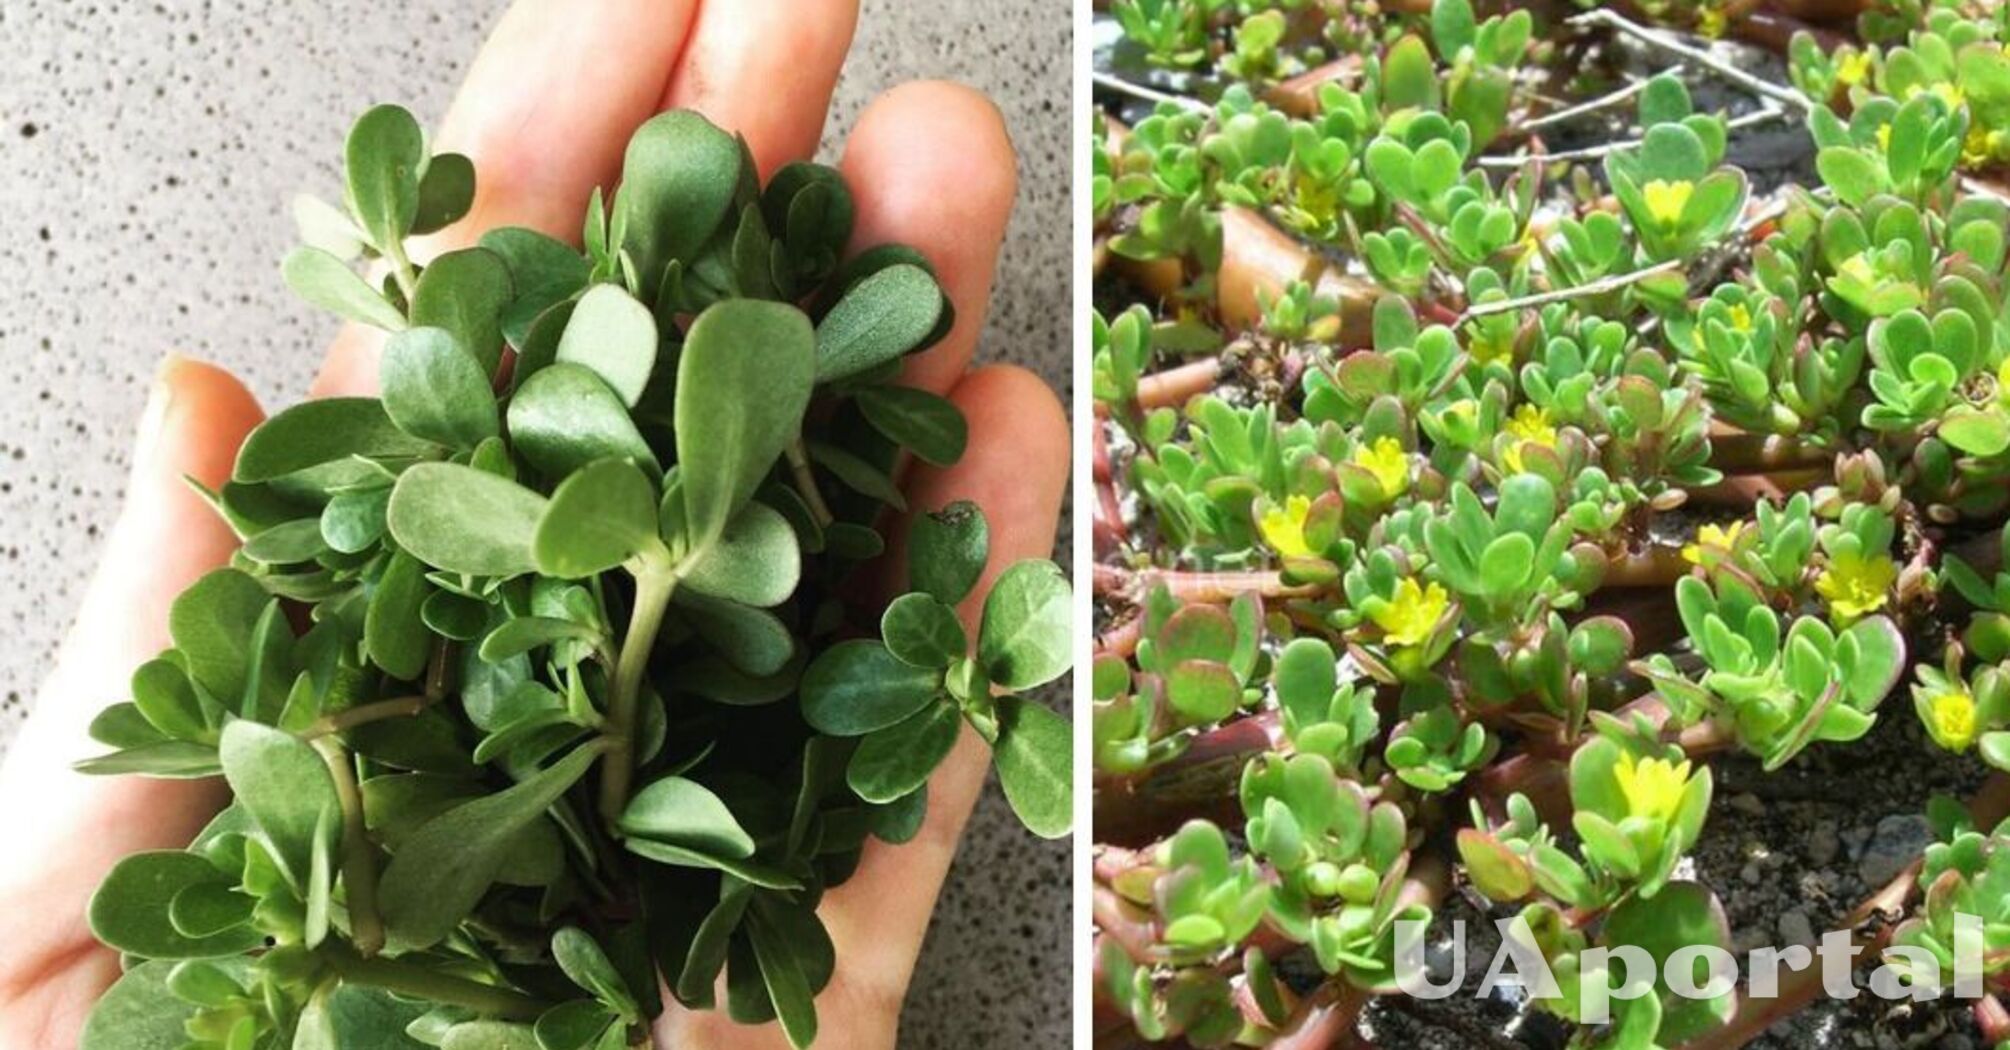 What weeds should not be pulled in the garden: what are the benefits of purslane and what is prepared from it